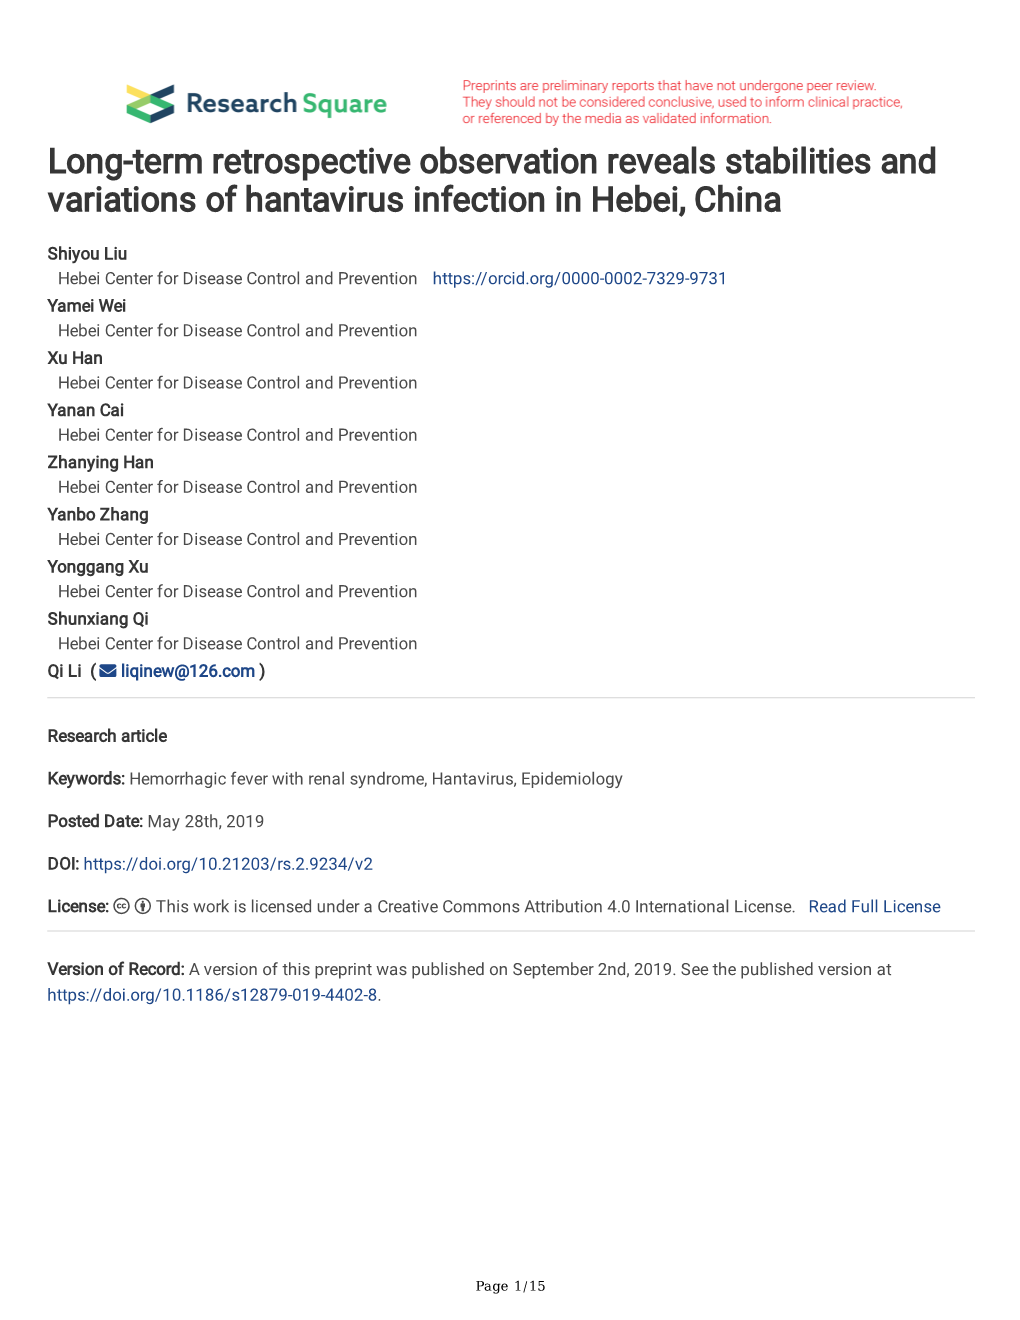 Long-Term Retrospective Observation Reveals Stabilities and Variations of Hantavirus Infection in Hebei, China